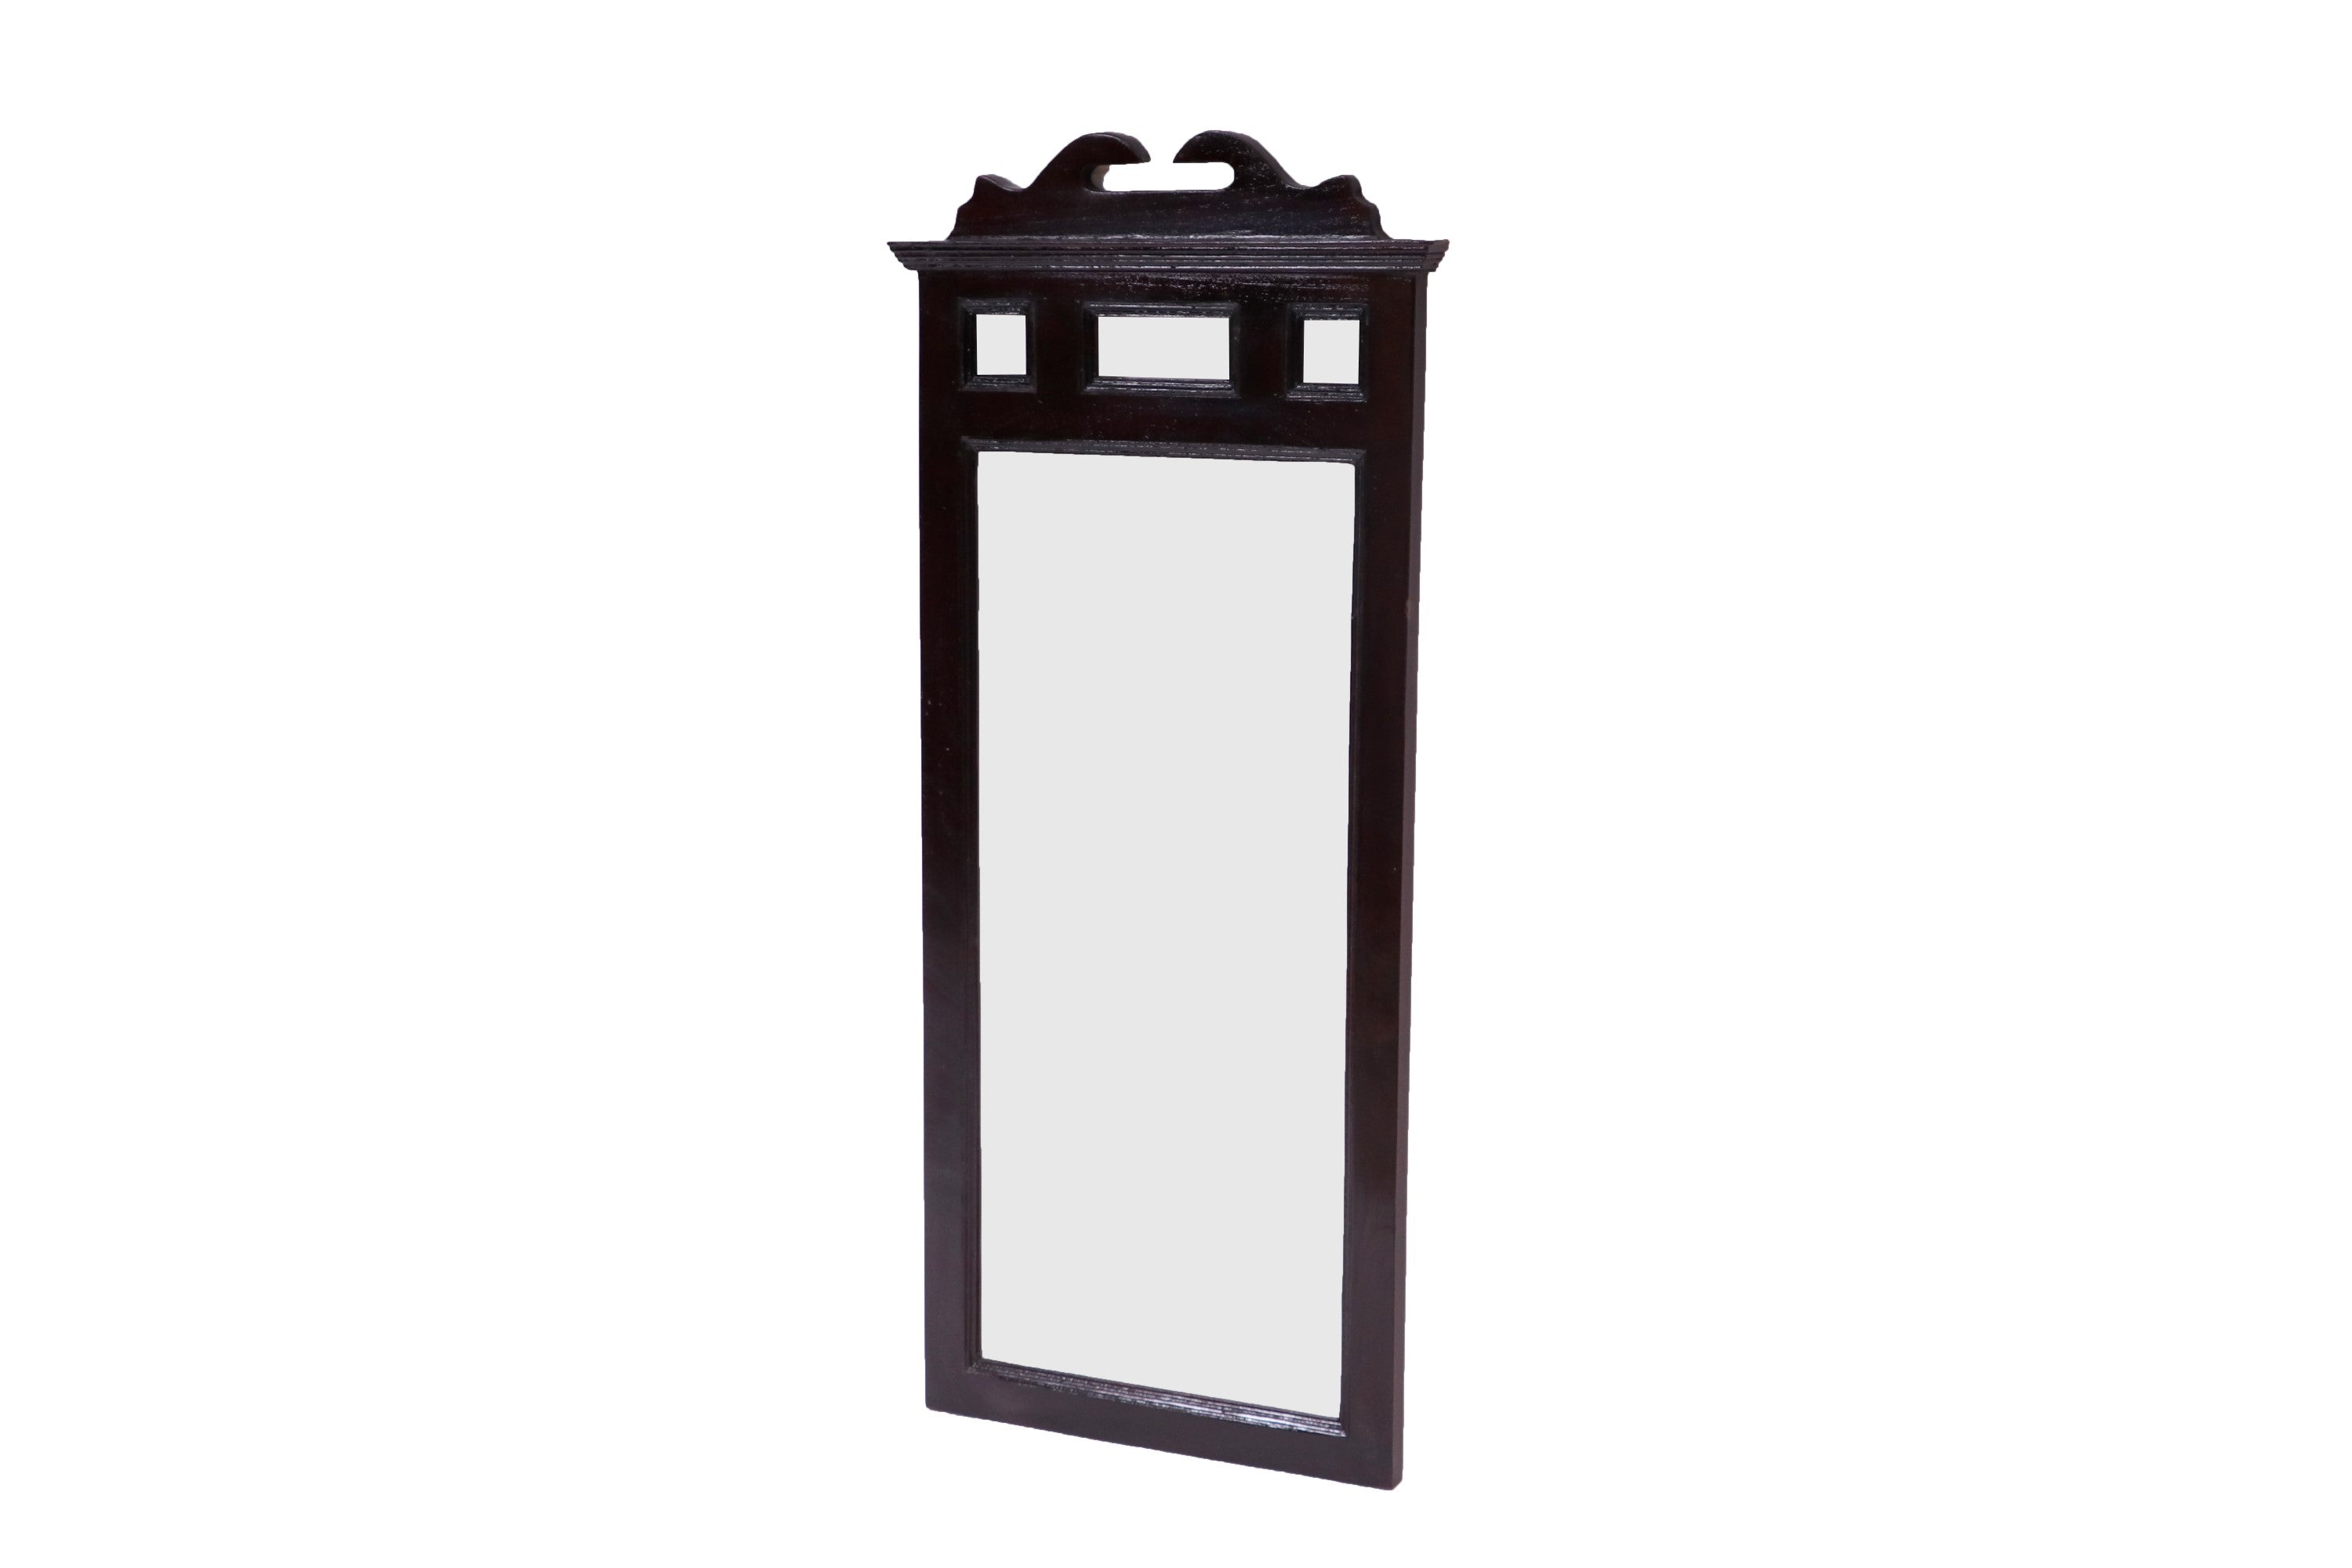 Traditionally designed Long Height Mirror Mirror